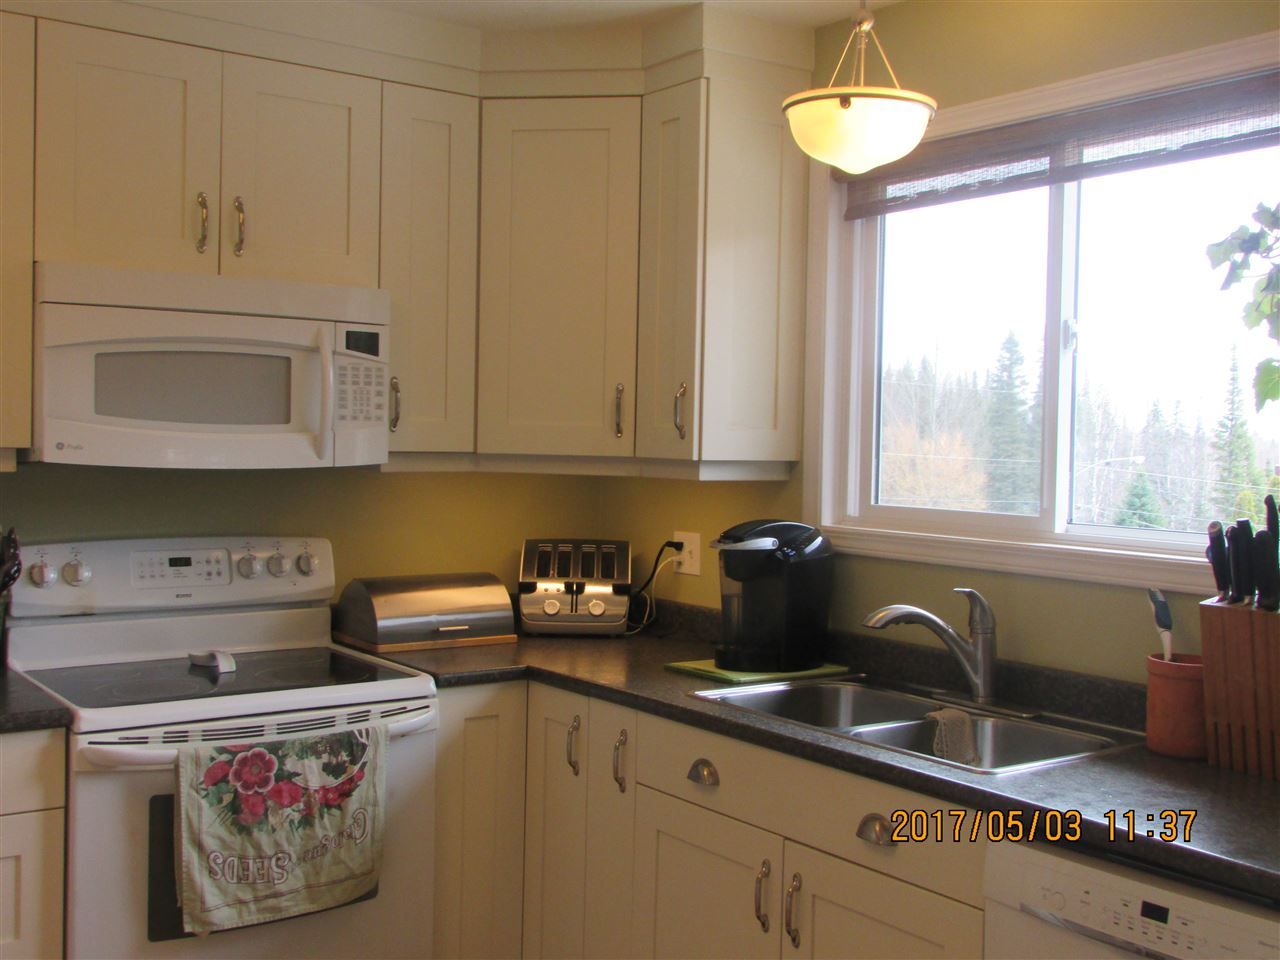 Photo 10: Photos: 2978 OAKRIDGE Crescent in Prince George: Ingala House for sale (PG City North (Zone 73))  : MLS®# R2162856